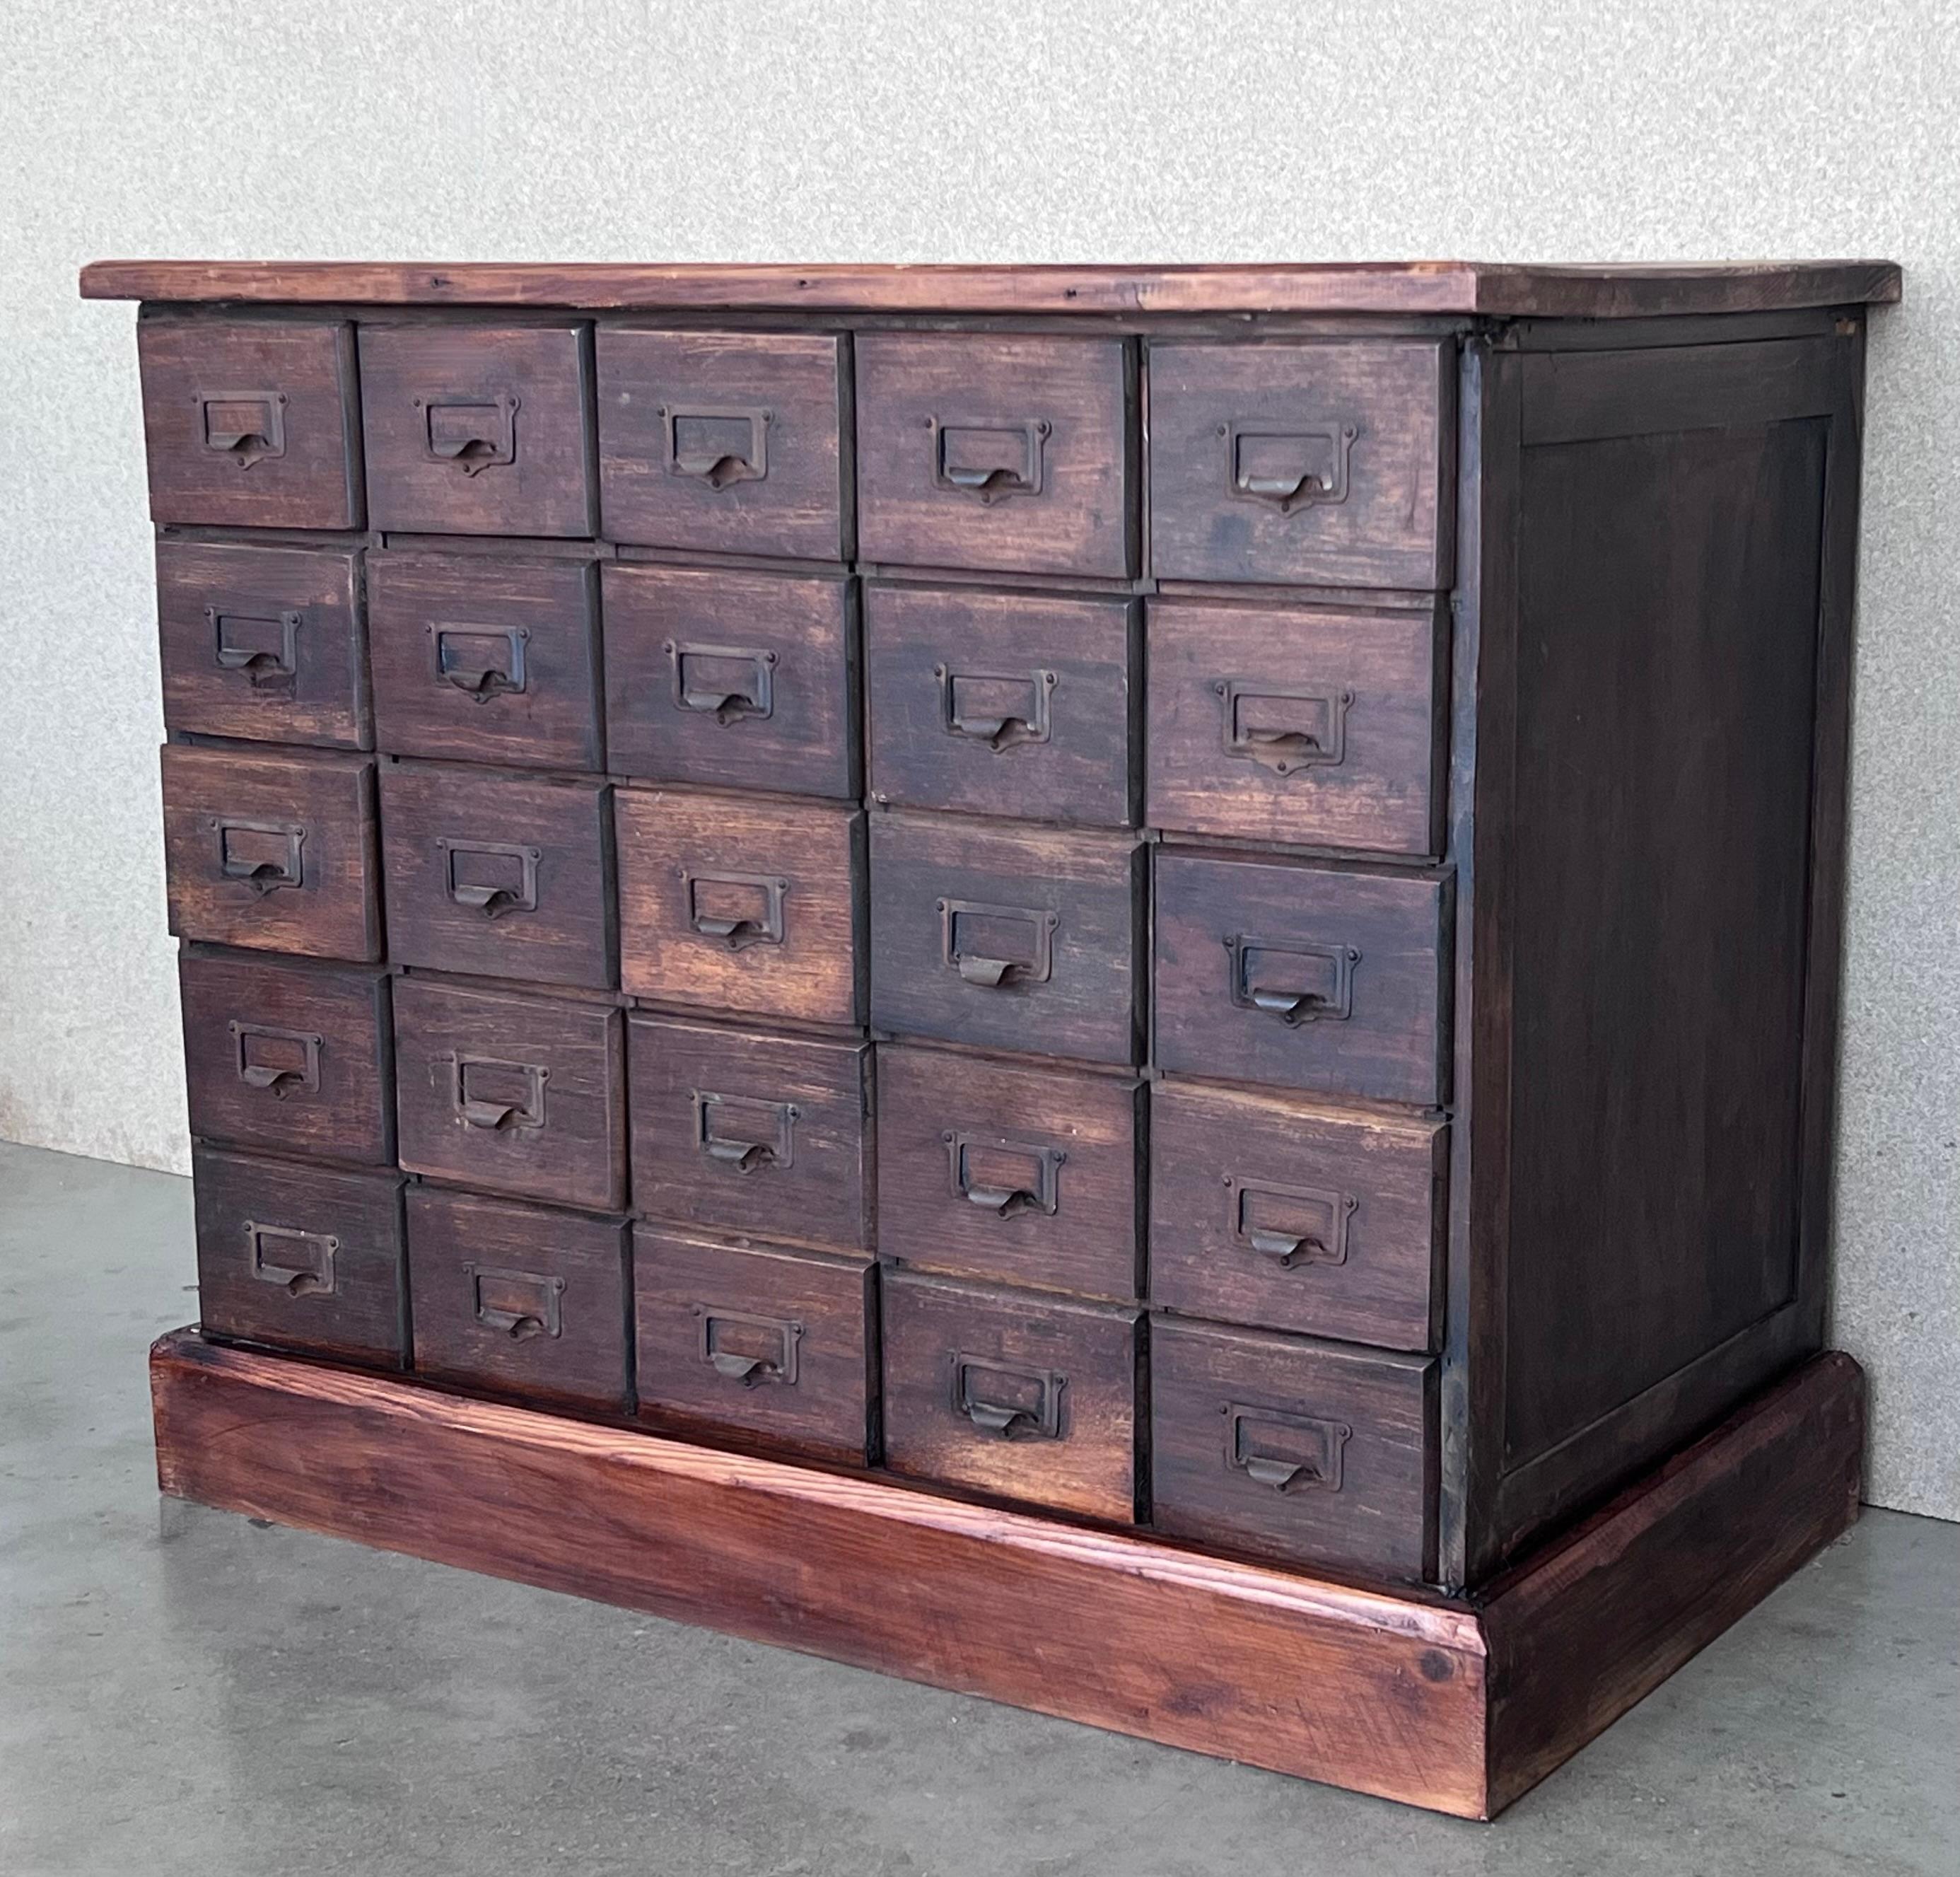 Mid-20th Century German Art Deco Oak Filing Cabinet / Bank of Drawers, circa 1950s For Sale